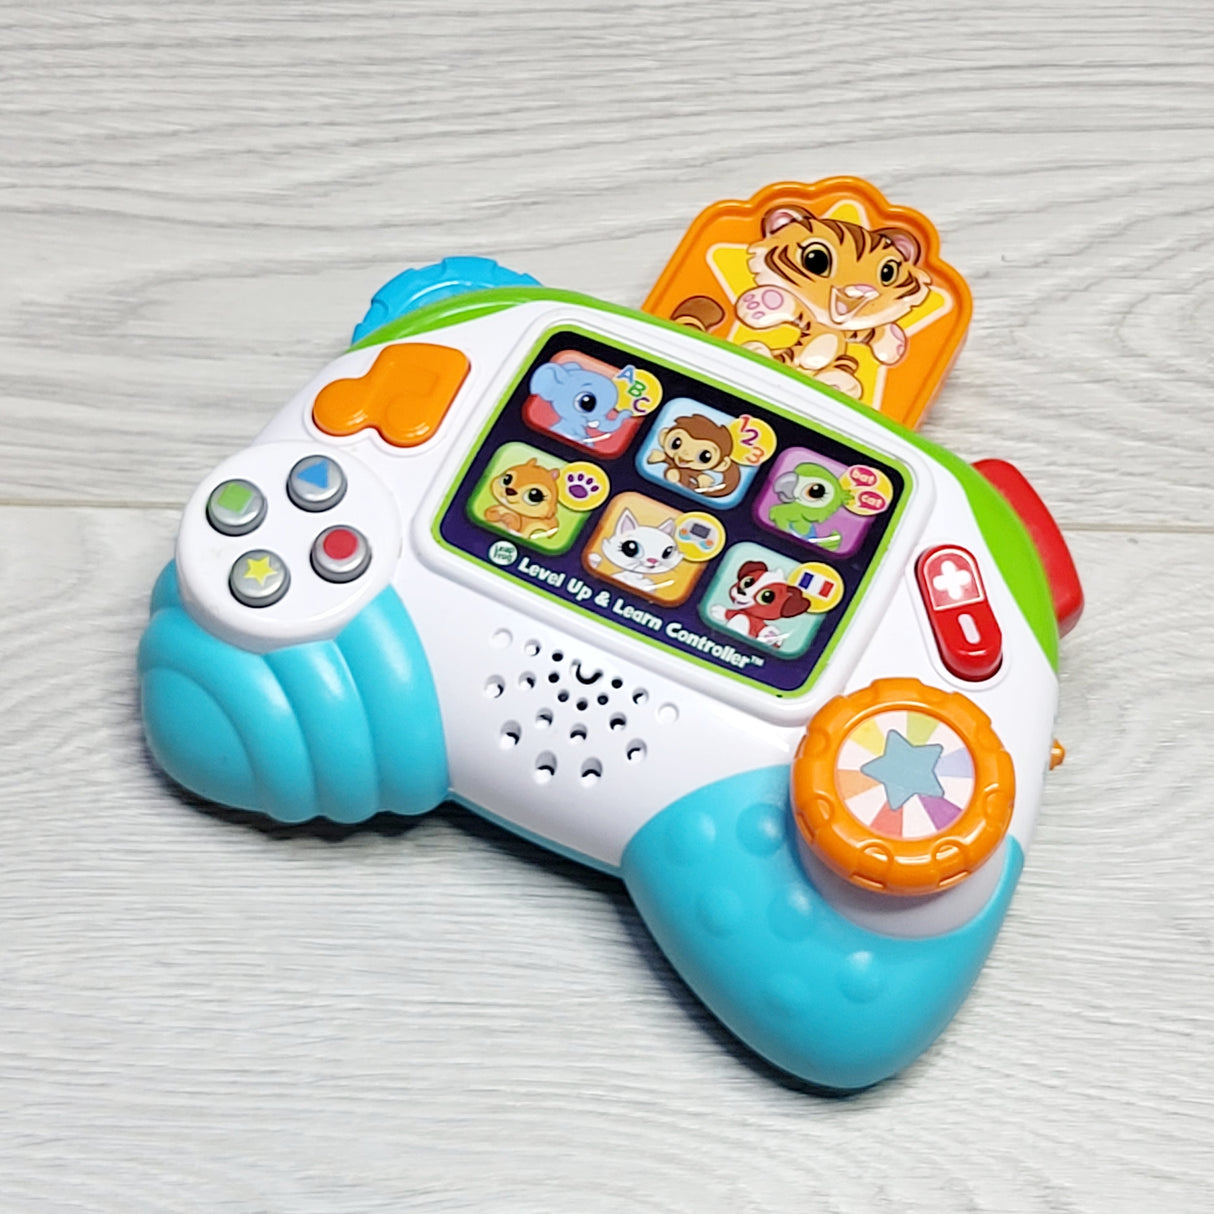 NKLB5 - LeapFrog Level Up and Learn Controller toy